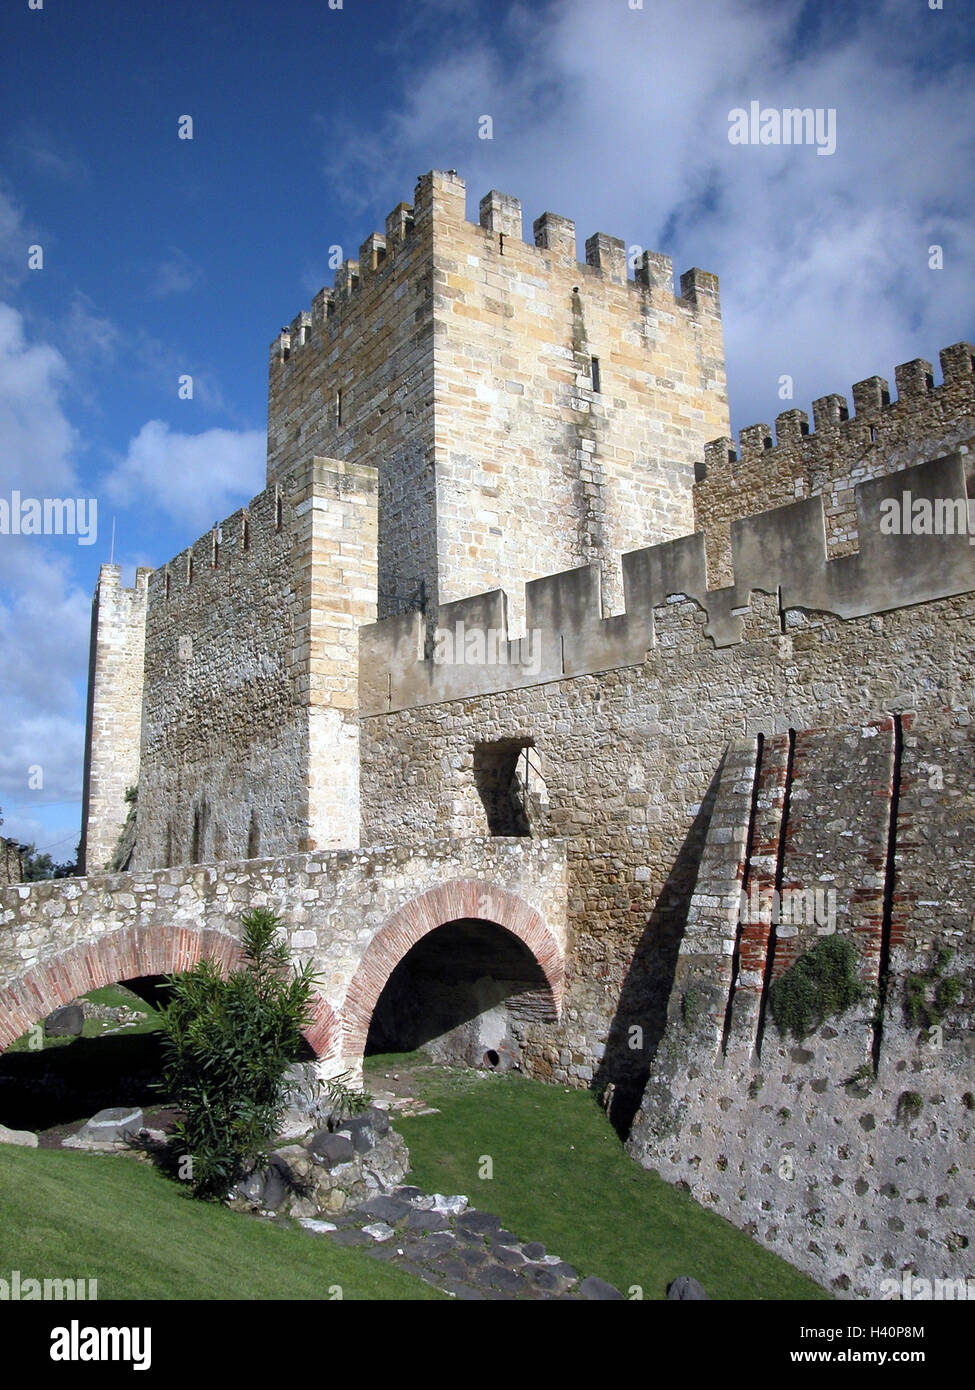 Portugal, Lisbon, Castelo Sao Jorge, detail, Europe, capital, town, Lisboa, castle, castle grounds, fortress, structure, fort, Alkazar, watch-tower, tower, castle defensive wall, historically, story, place of interest Stock Photo